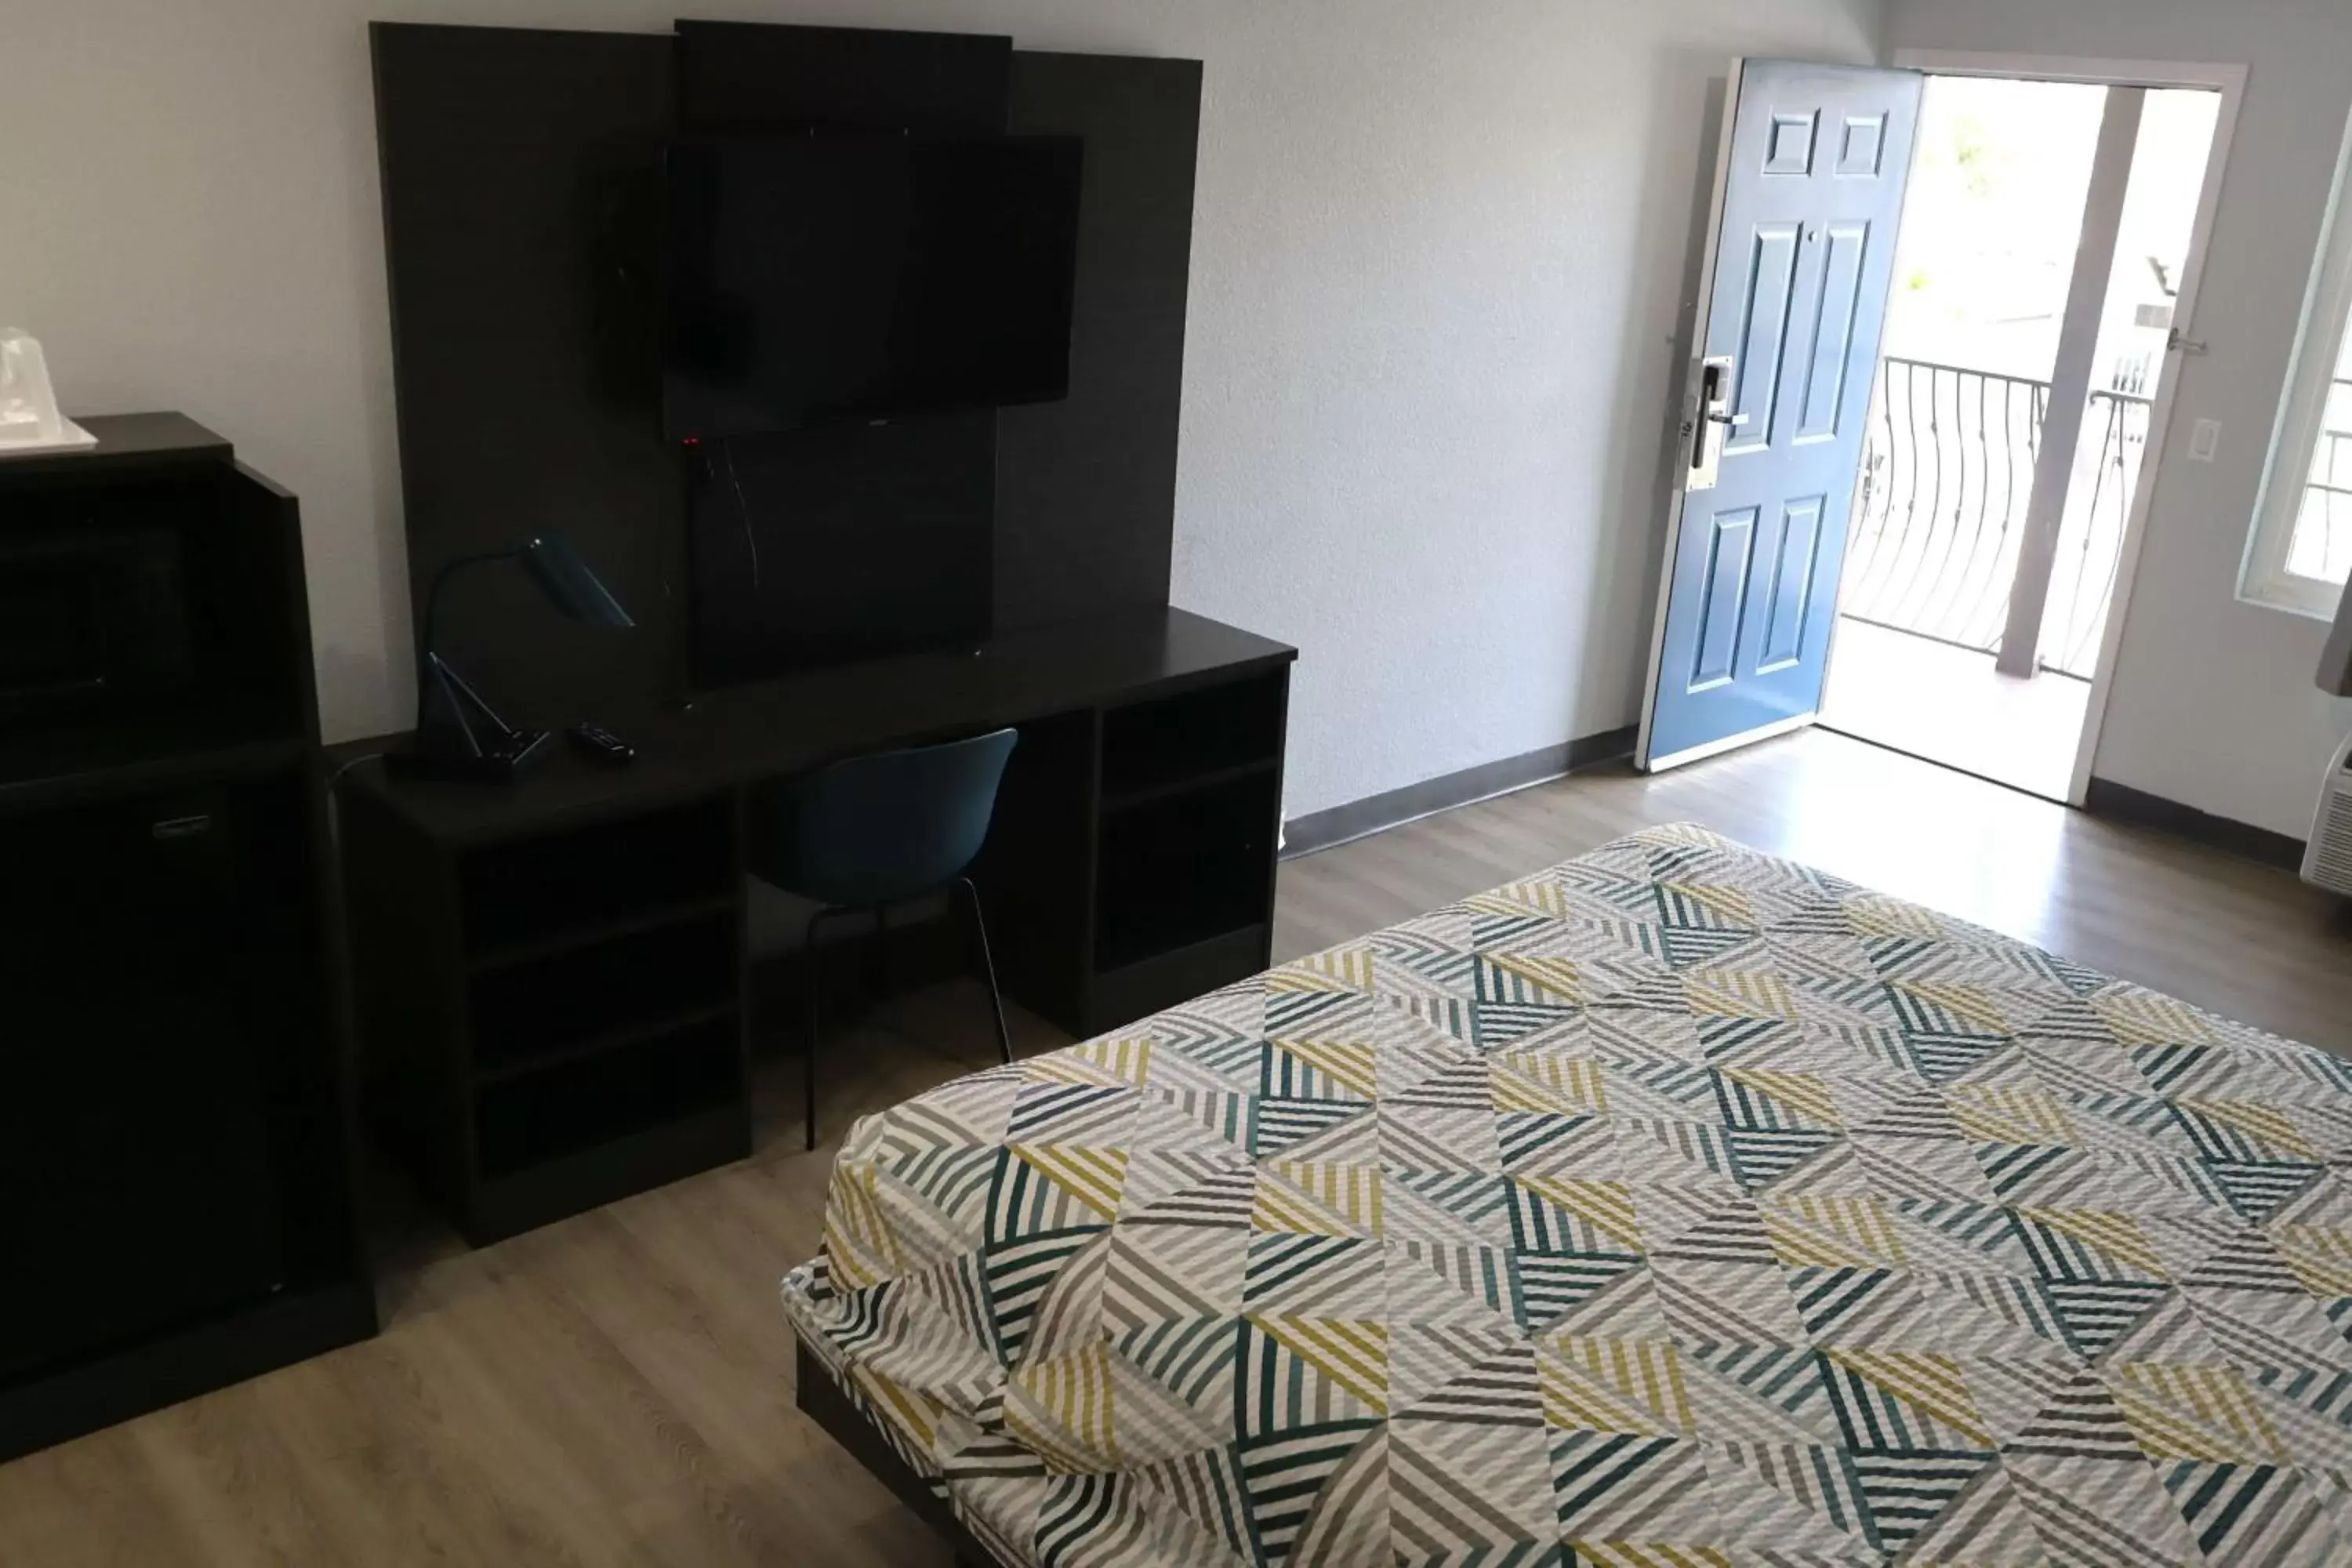 Bedroom, TV/Entertainment Center in Motel 6-San Diego, CA - Southbay